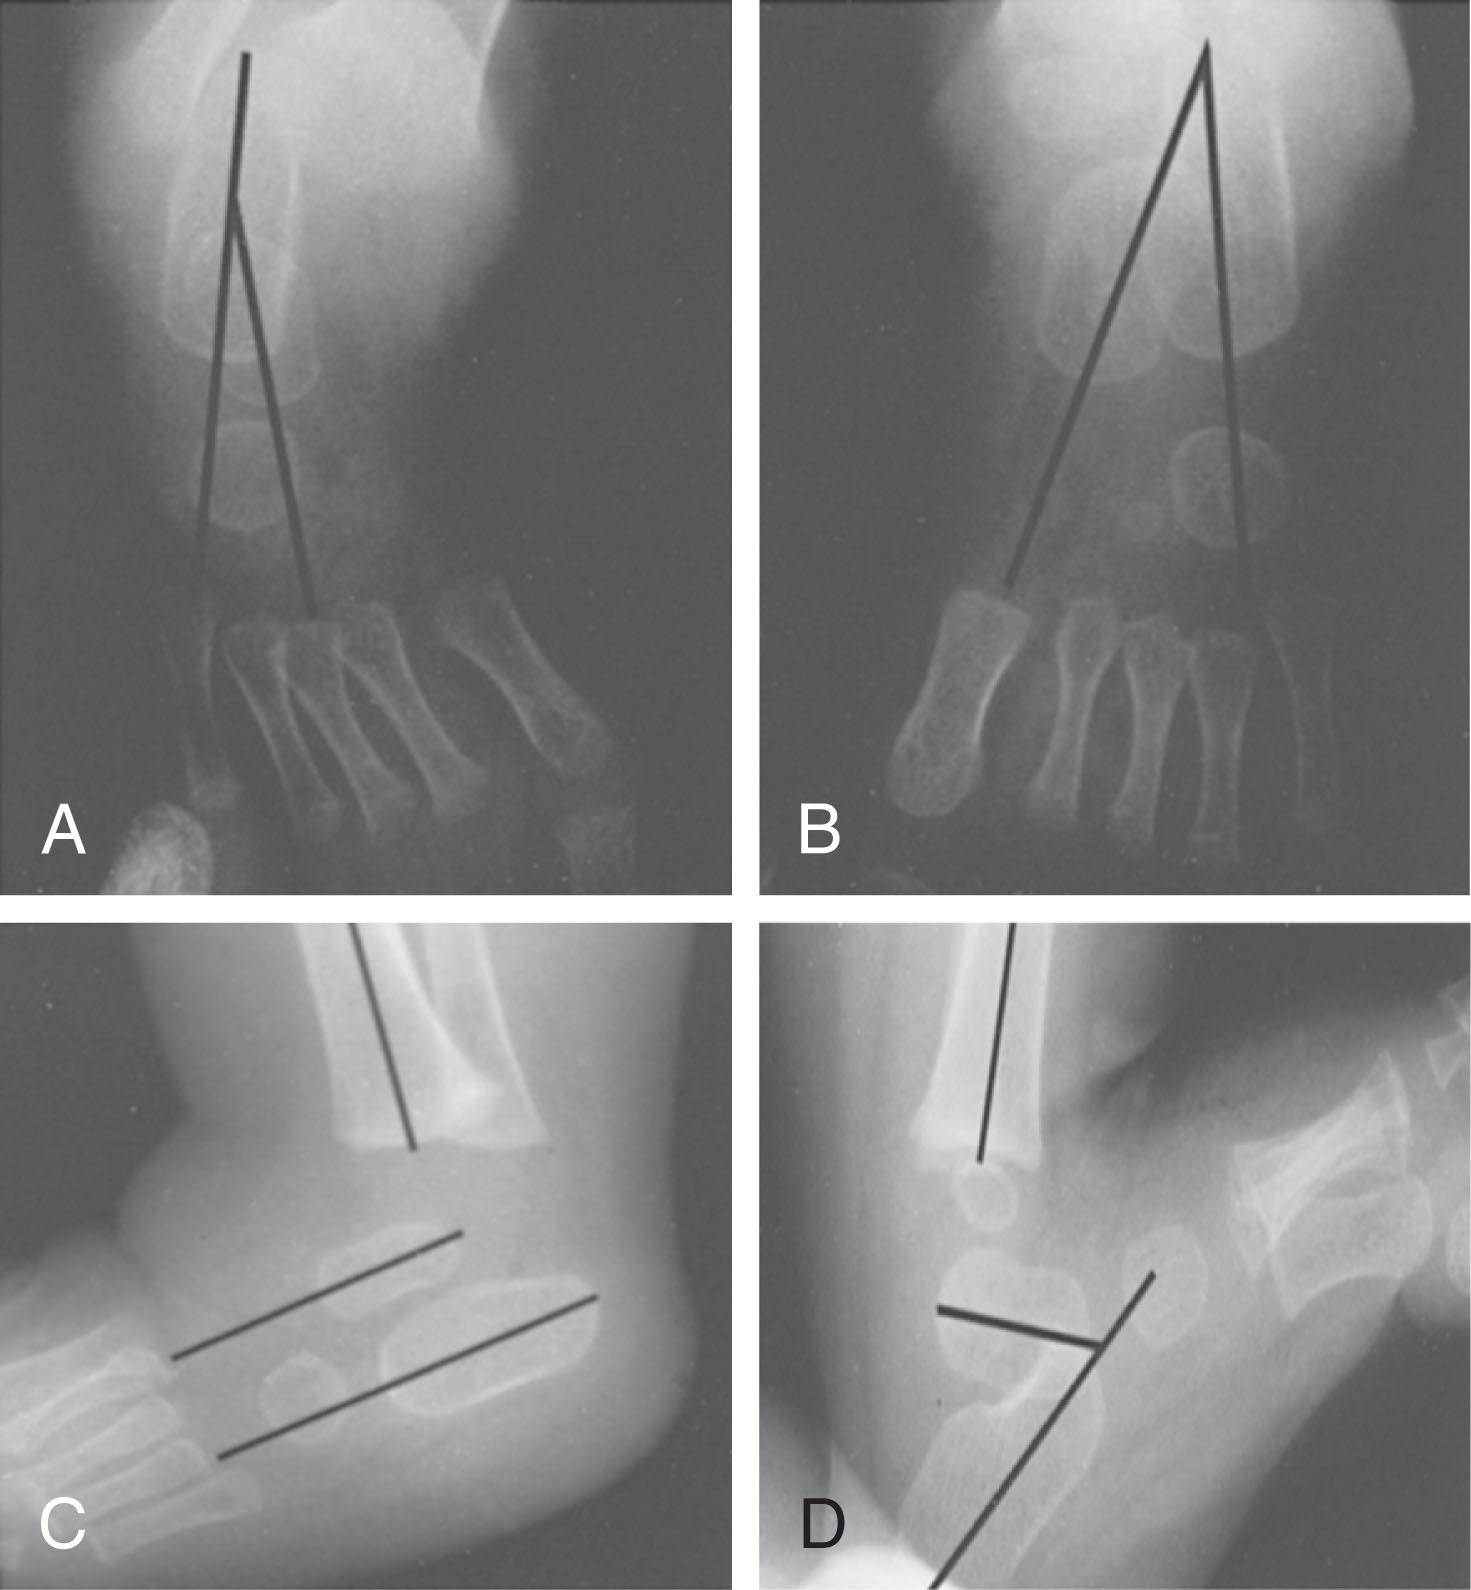 Fig. 41-2, Radiographic evaluation of clubfoot. A , Decreased talocalcaneal angle and negative talus–first metatarsal angle on anteroposterior view of right clubfoot. B , Talocalcaneal angle of normal left foot. C , Talocalcaneal angle of zero and negative tibiocalcaneal angle on dorsiflexion lateral view of right clubfoot. D , Same angles in normal left foot.